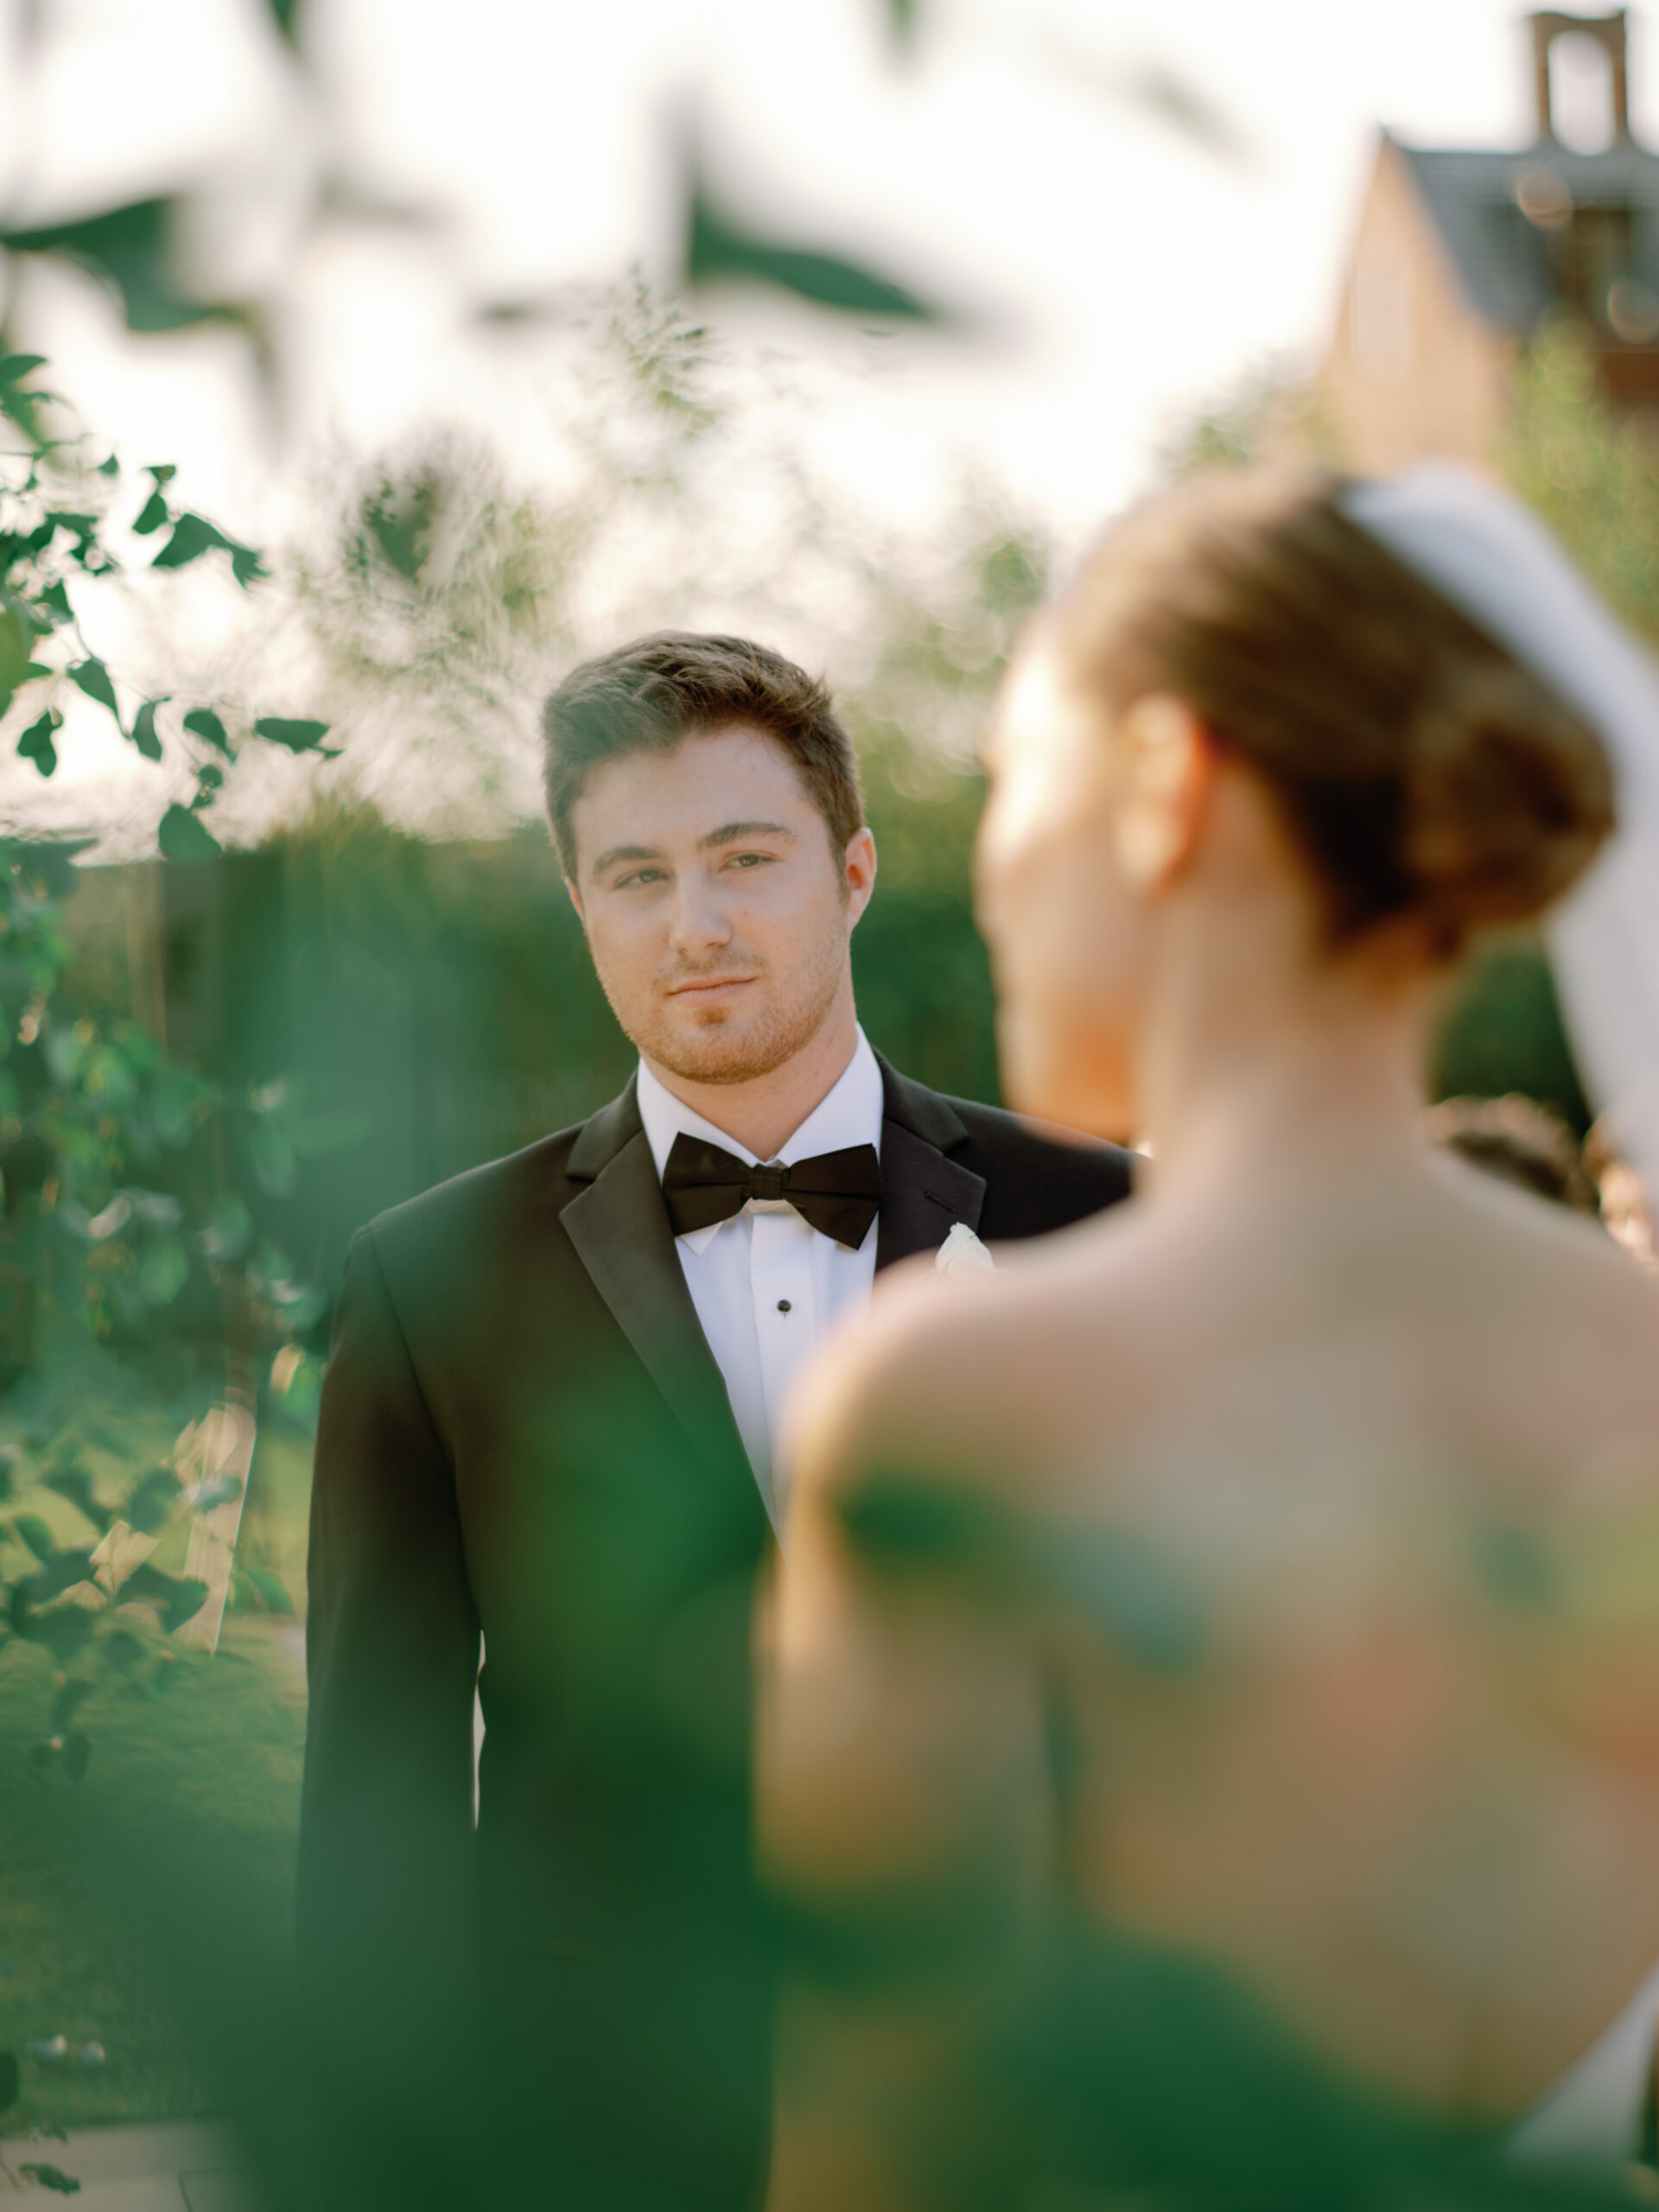 Candid photo of stolen glances of the groom during the wedding ceremony. Image by Jenny Fu Studio